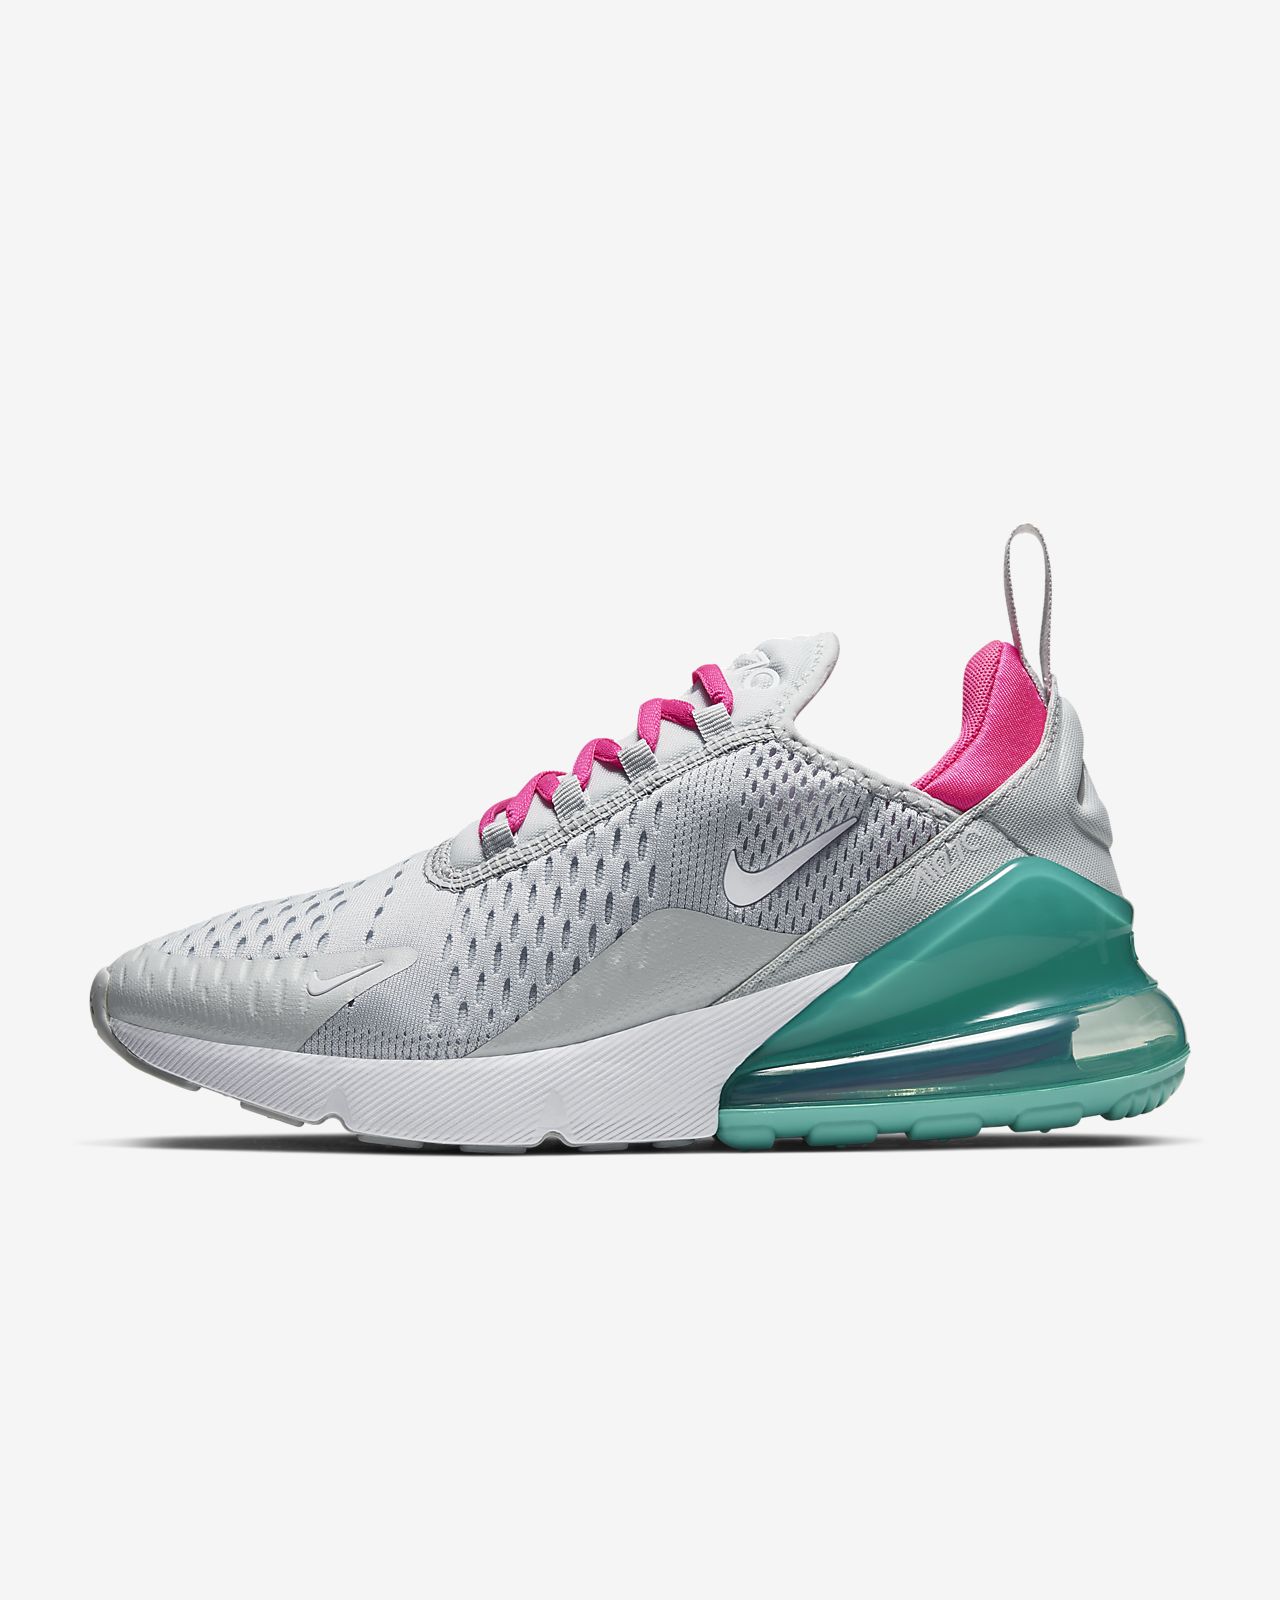 nike 1 air max 27c running shoes- OFF 